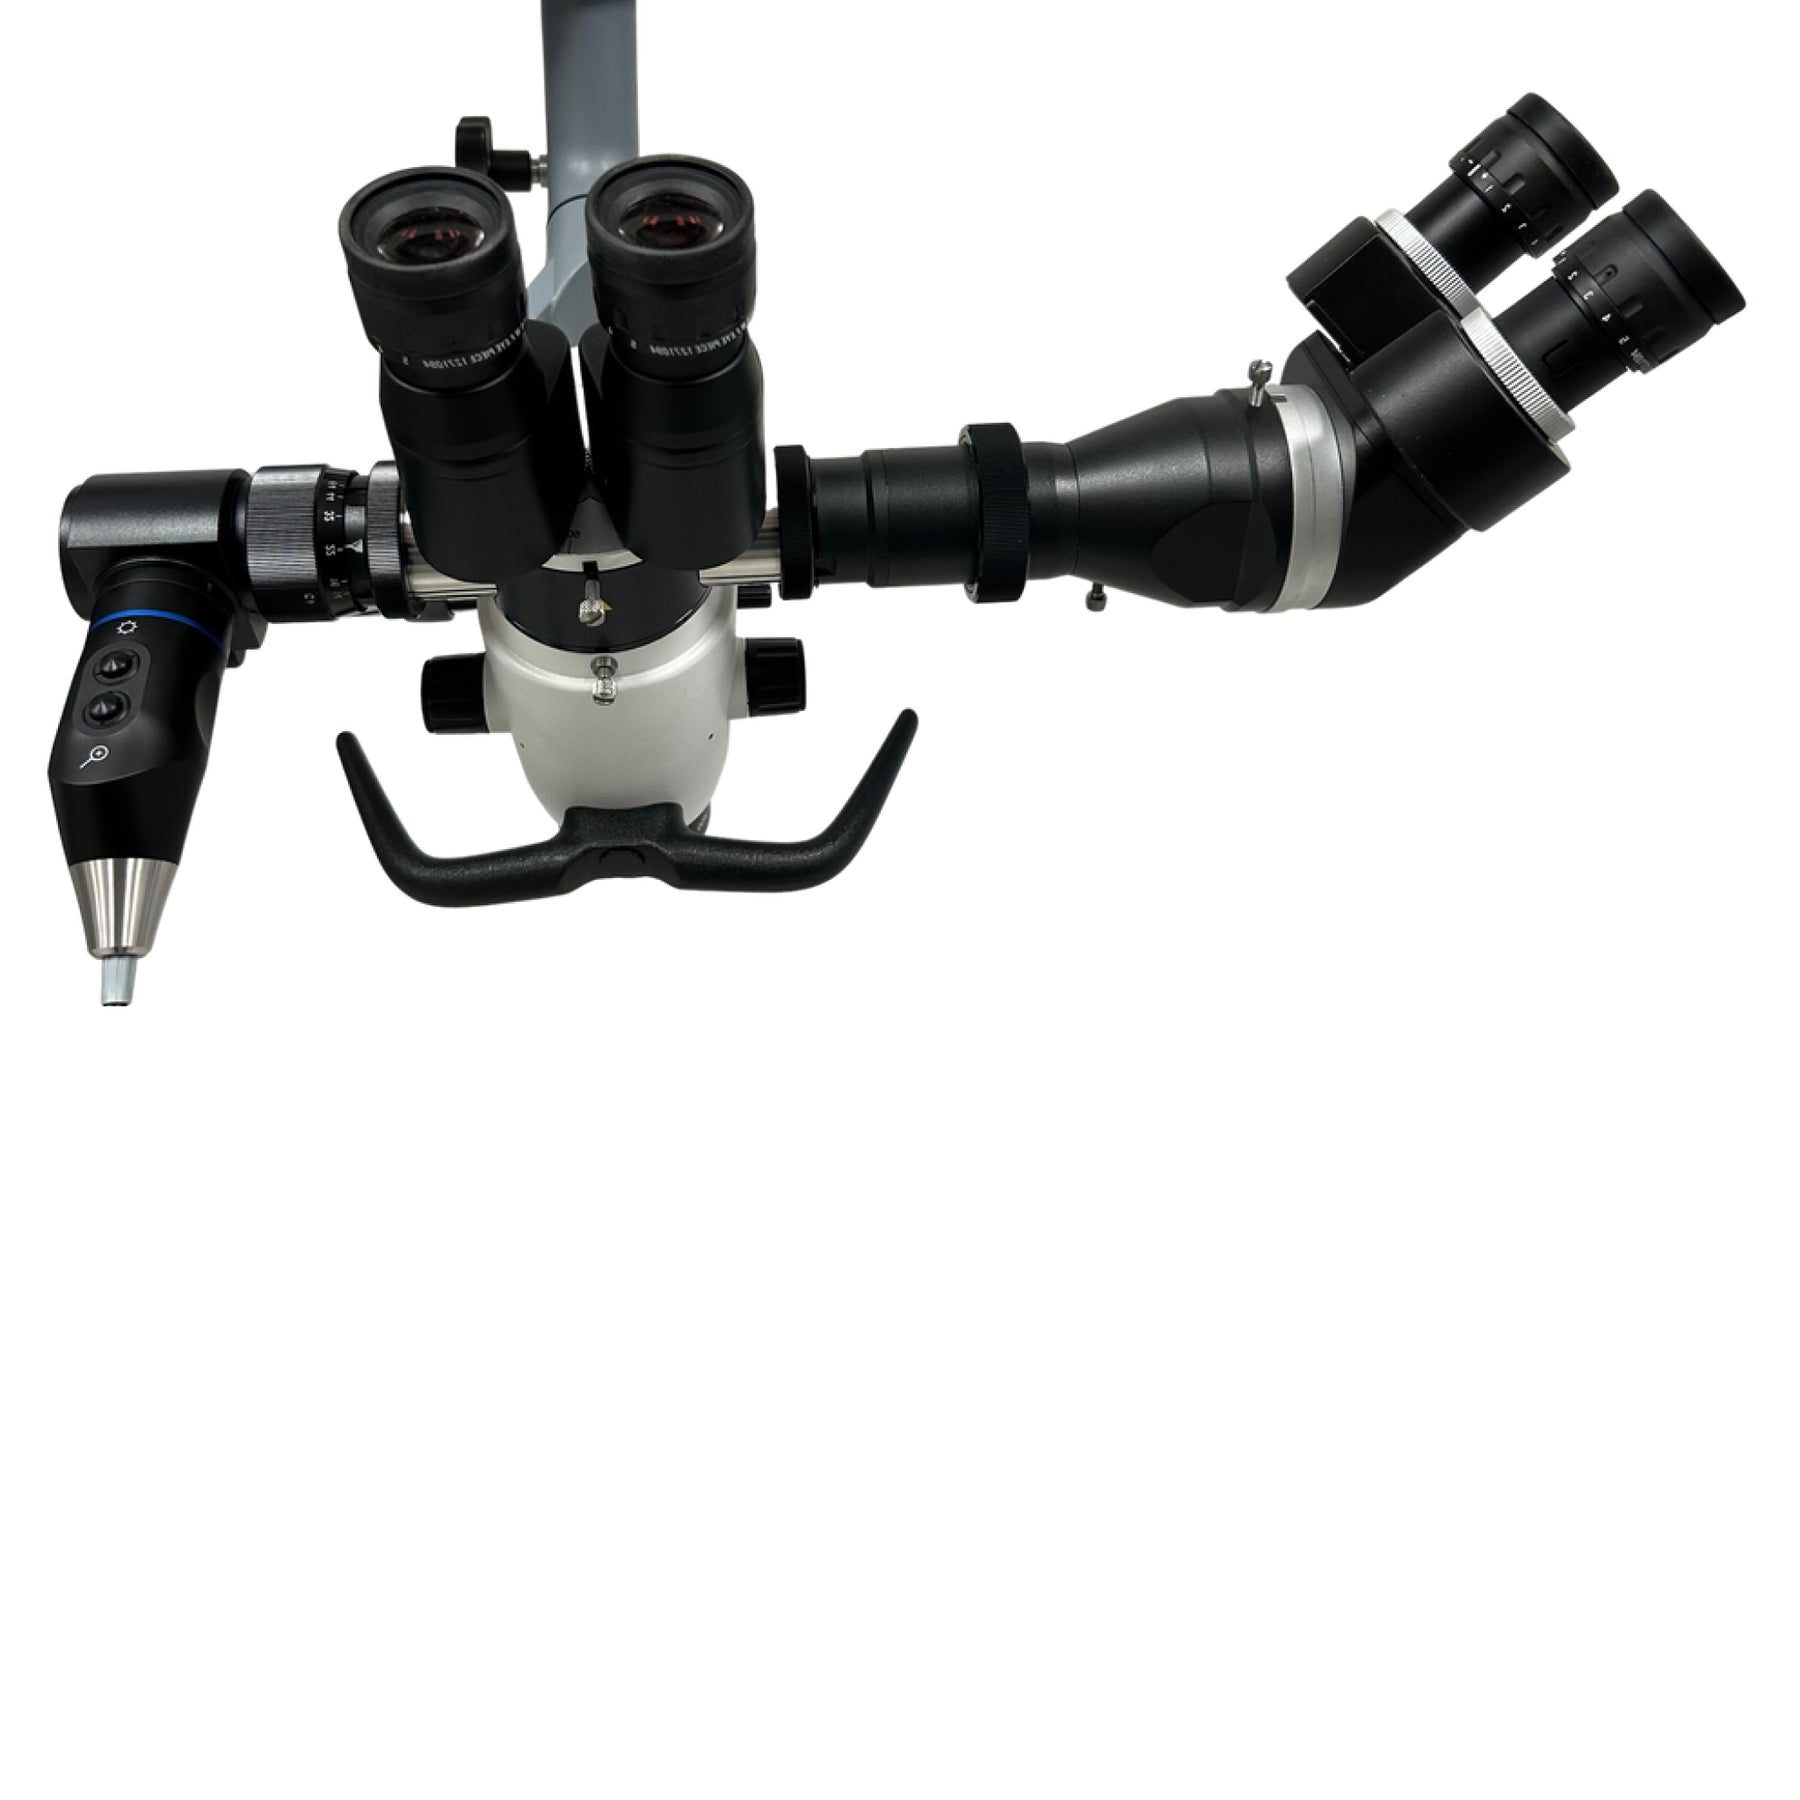 The OM-200 operating microscope is the latest model in the Ecleris OM-Series range. 